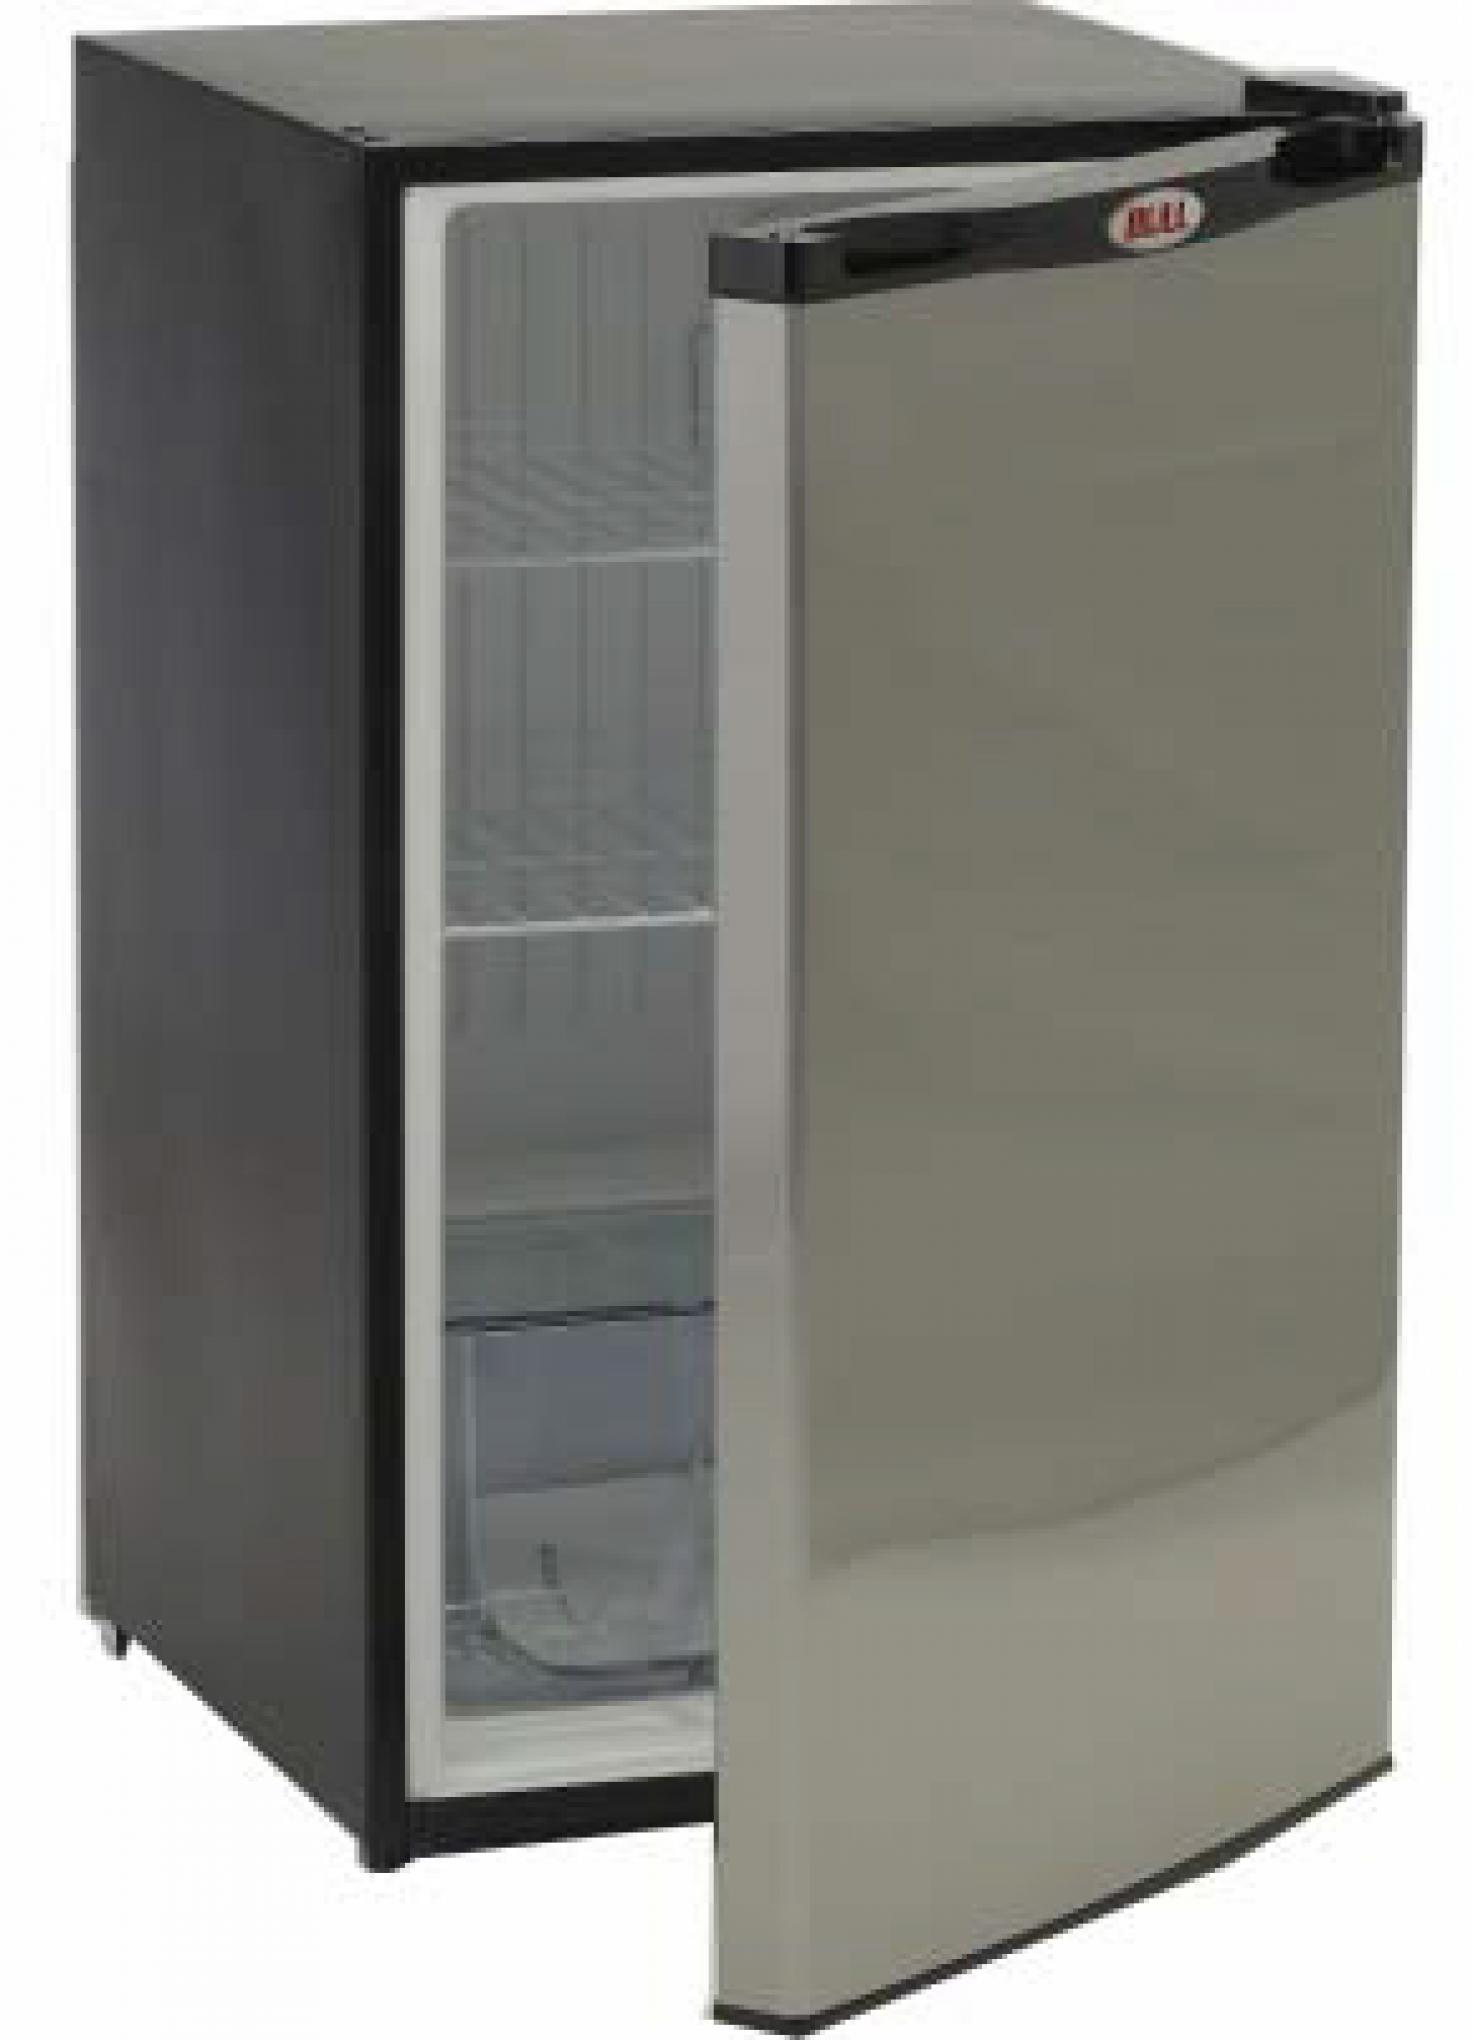 Bull Refrigerator with Stainless Steel Front Panel for Outdoor Kitchen